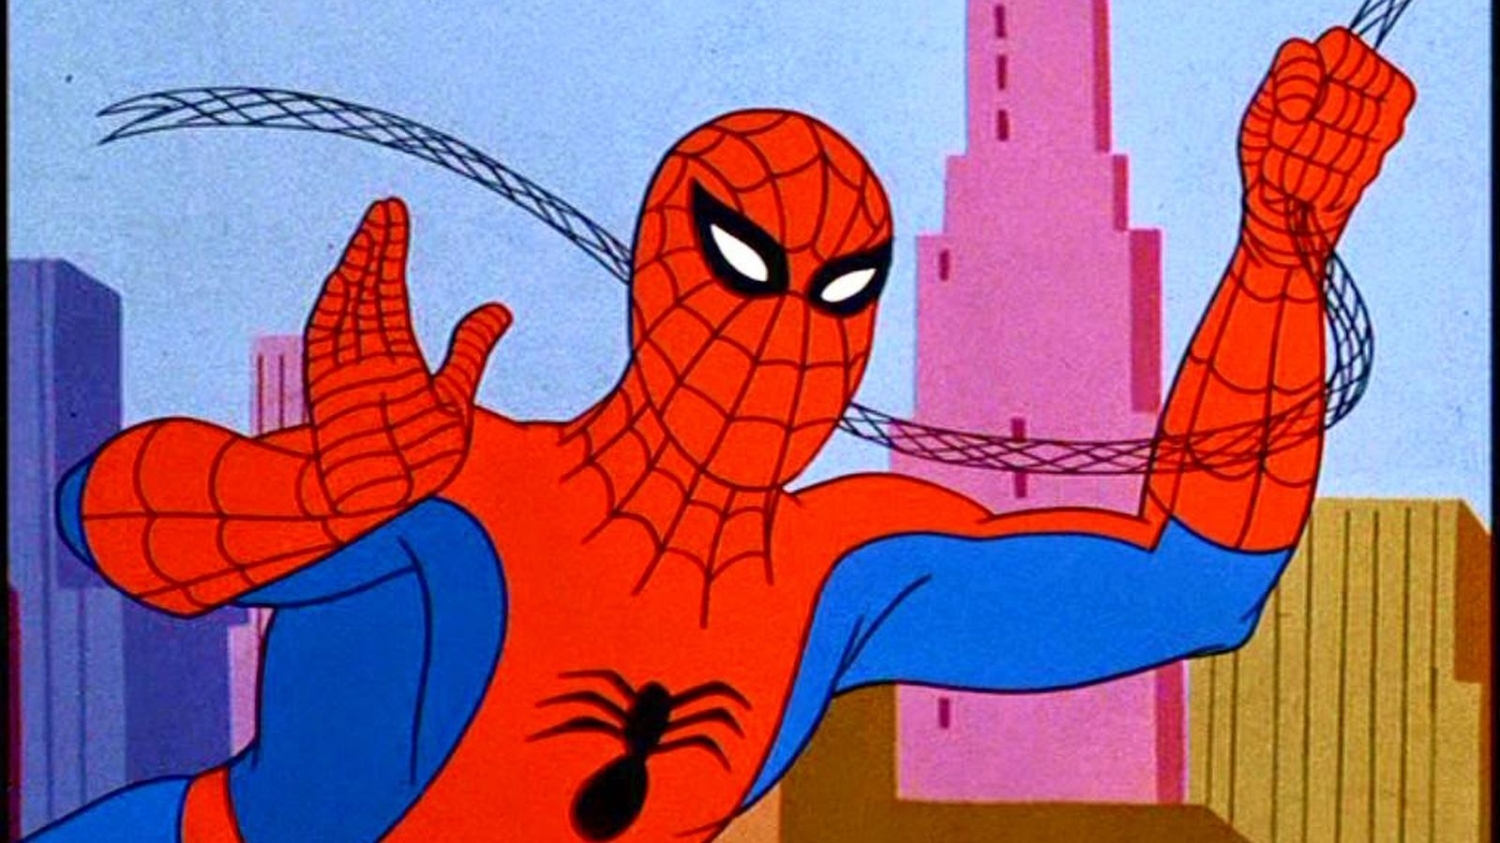 OK, let’s all listen to that 1970s rock opera about Spider-Man…..